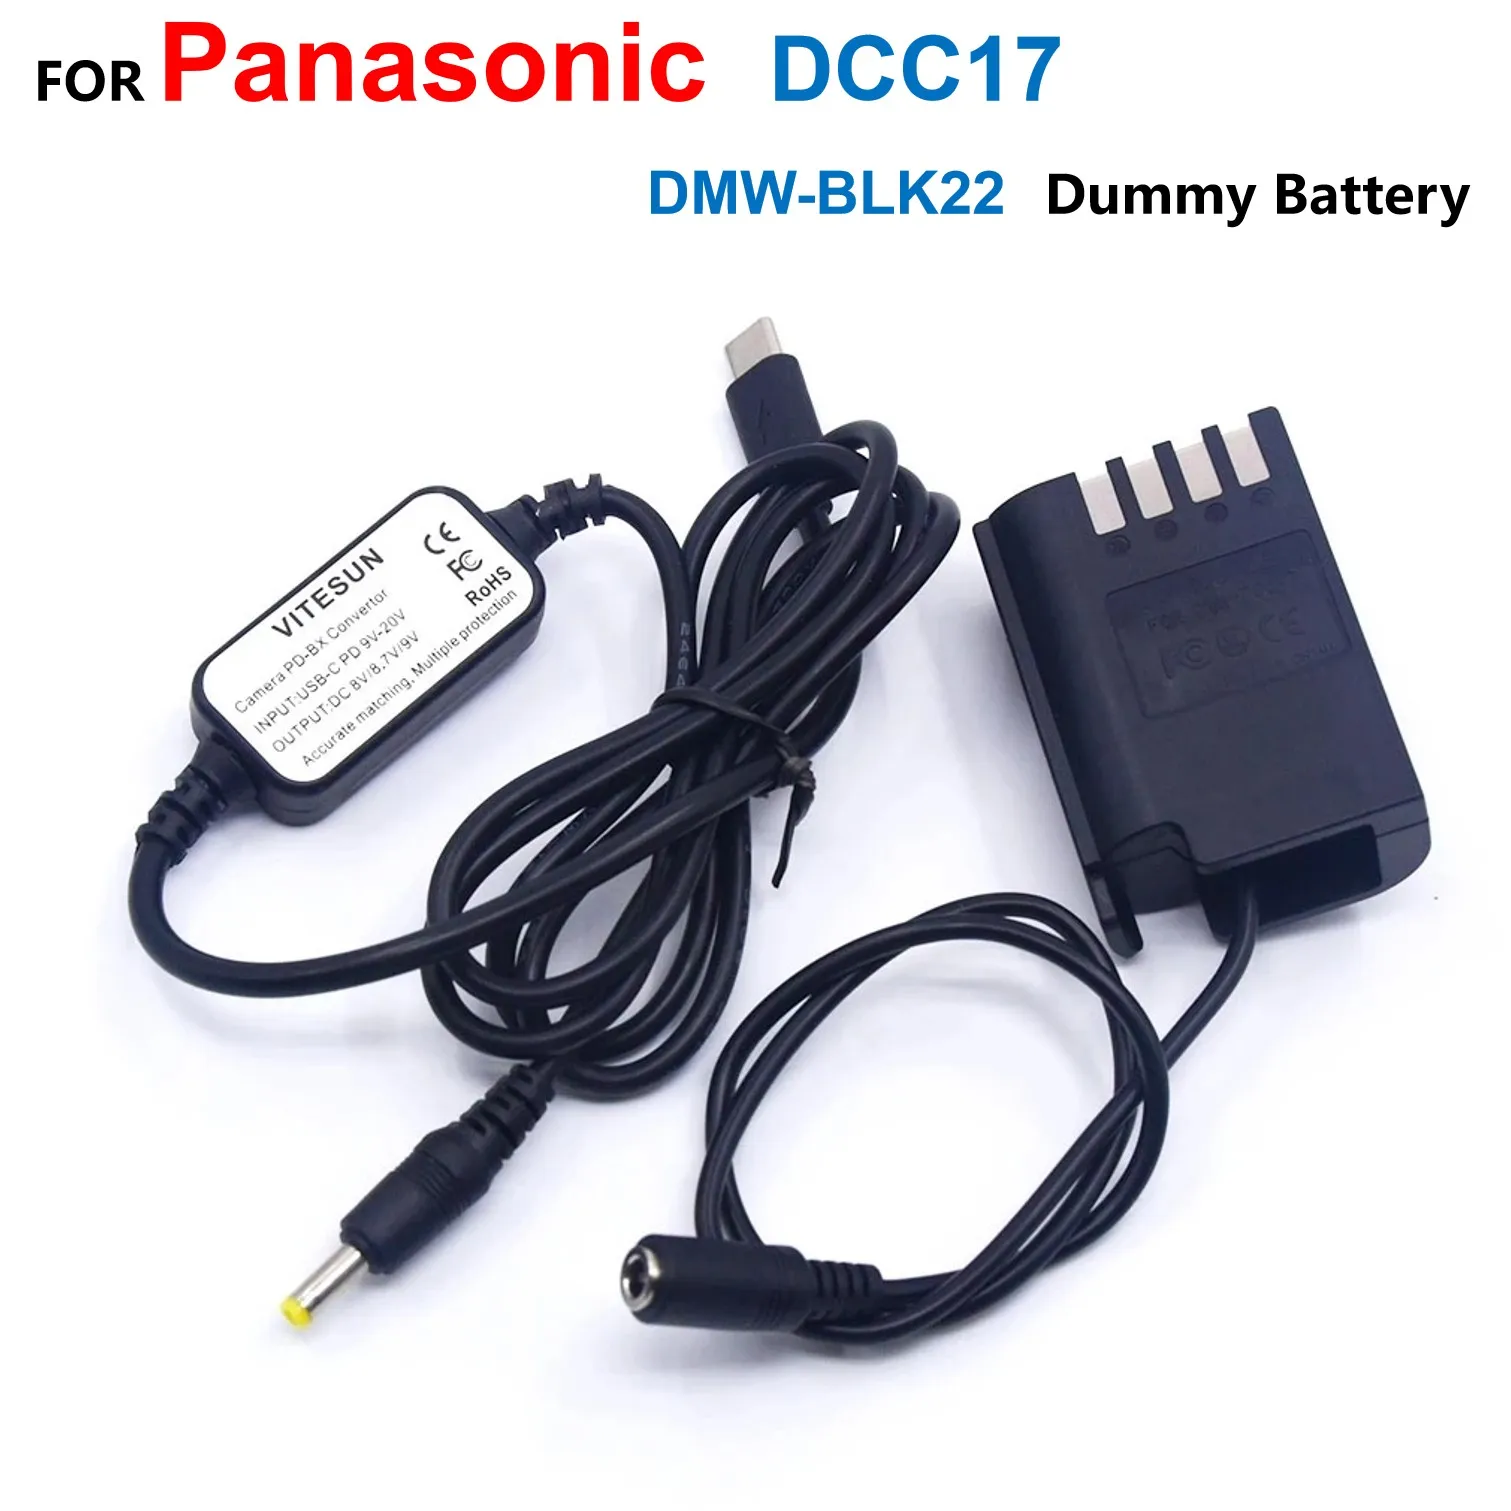 

DMW-BLK22 Dummy Battery DCC17 DC Coupler USB Type-C PD Converter To DC Cable For Panasonic Lumix S5 DC-S5 DC-S5K Camera